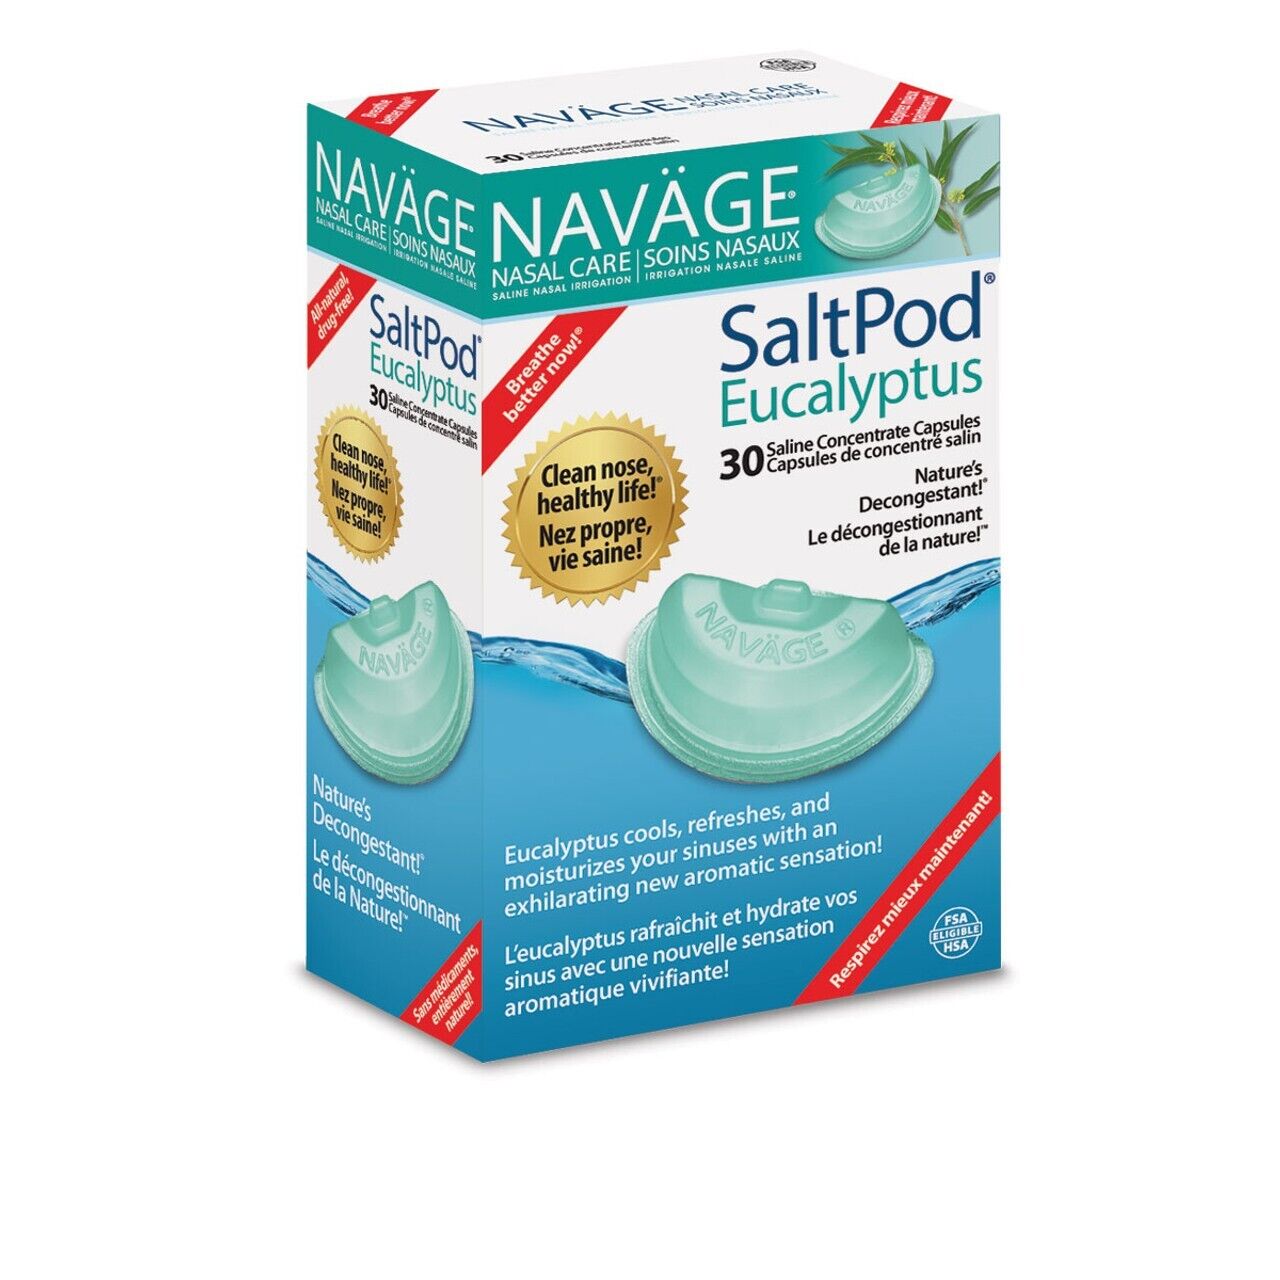 Navage Eucalyptus Saltpod®: 30-pack Capsules For Use With Navage Nose Cleaner